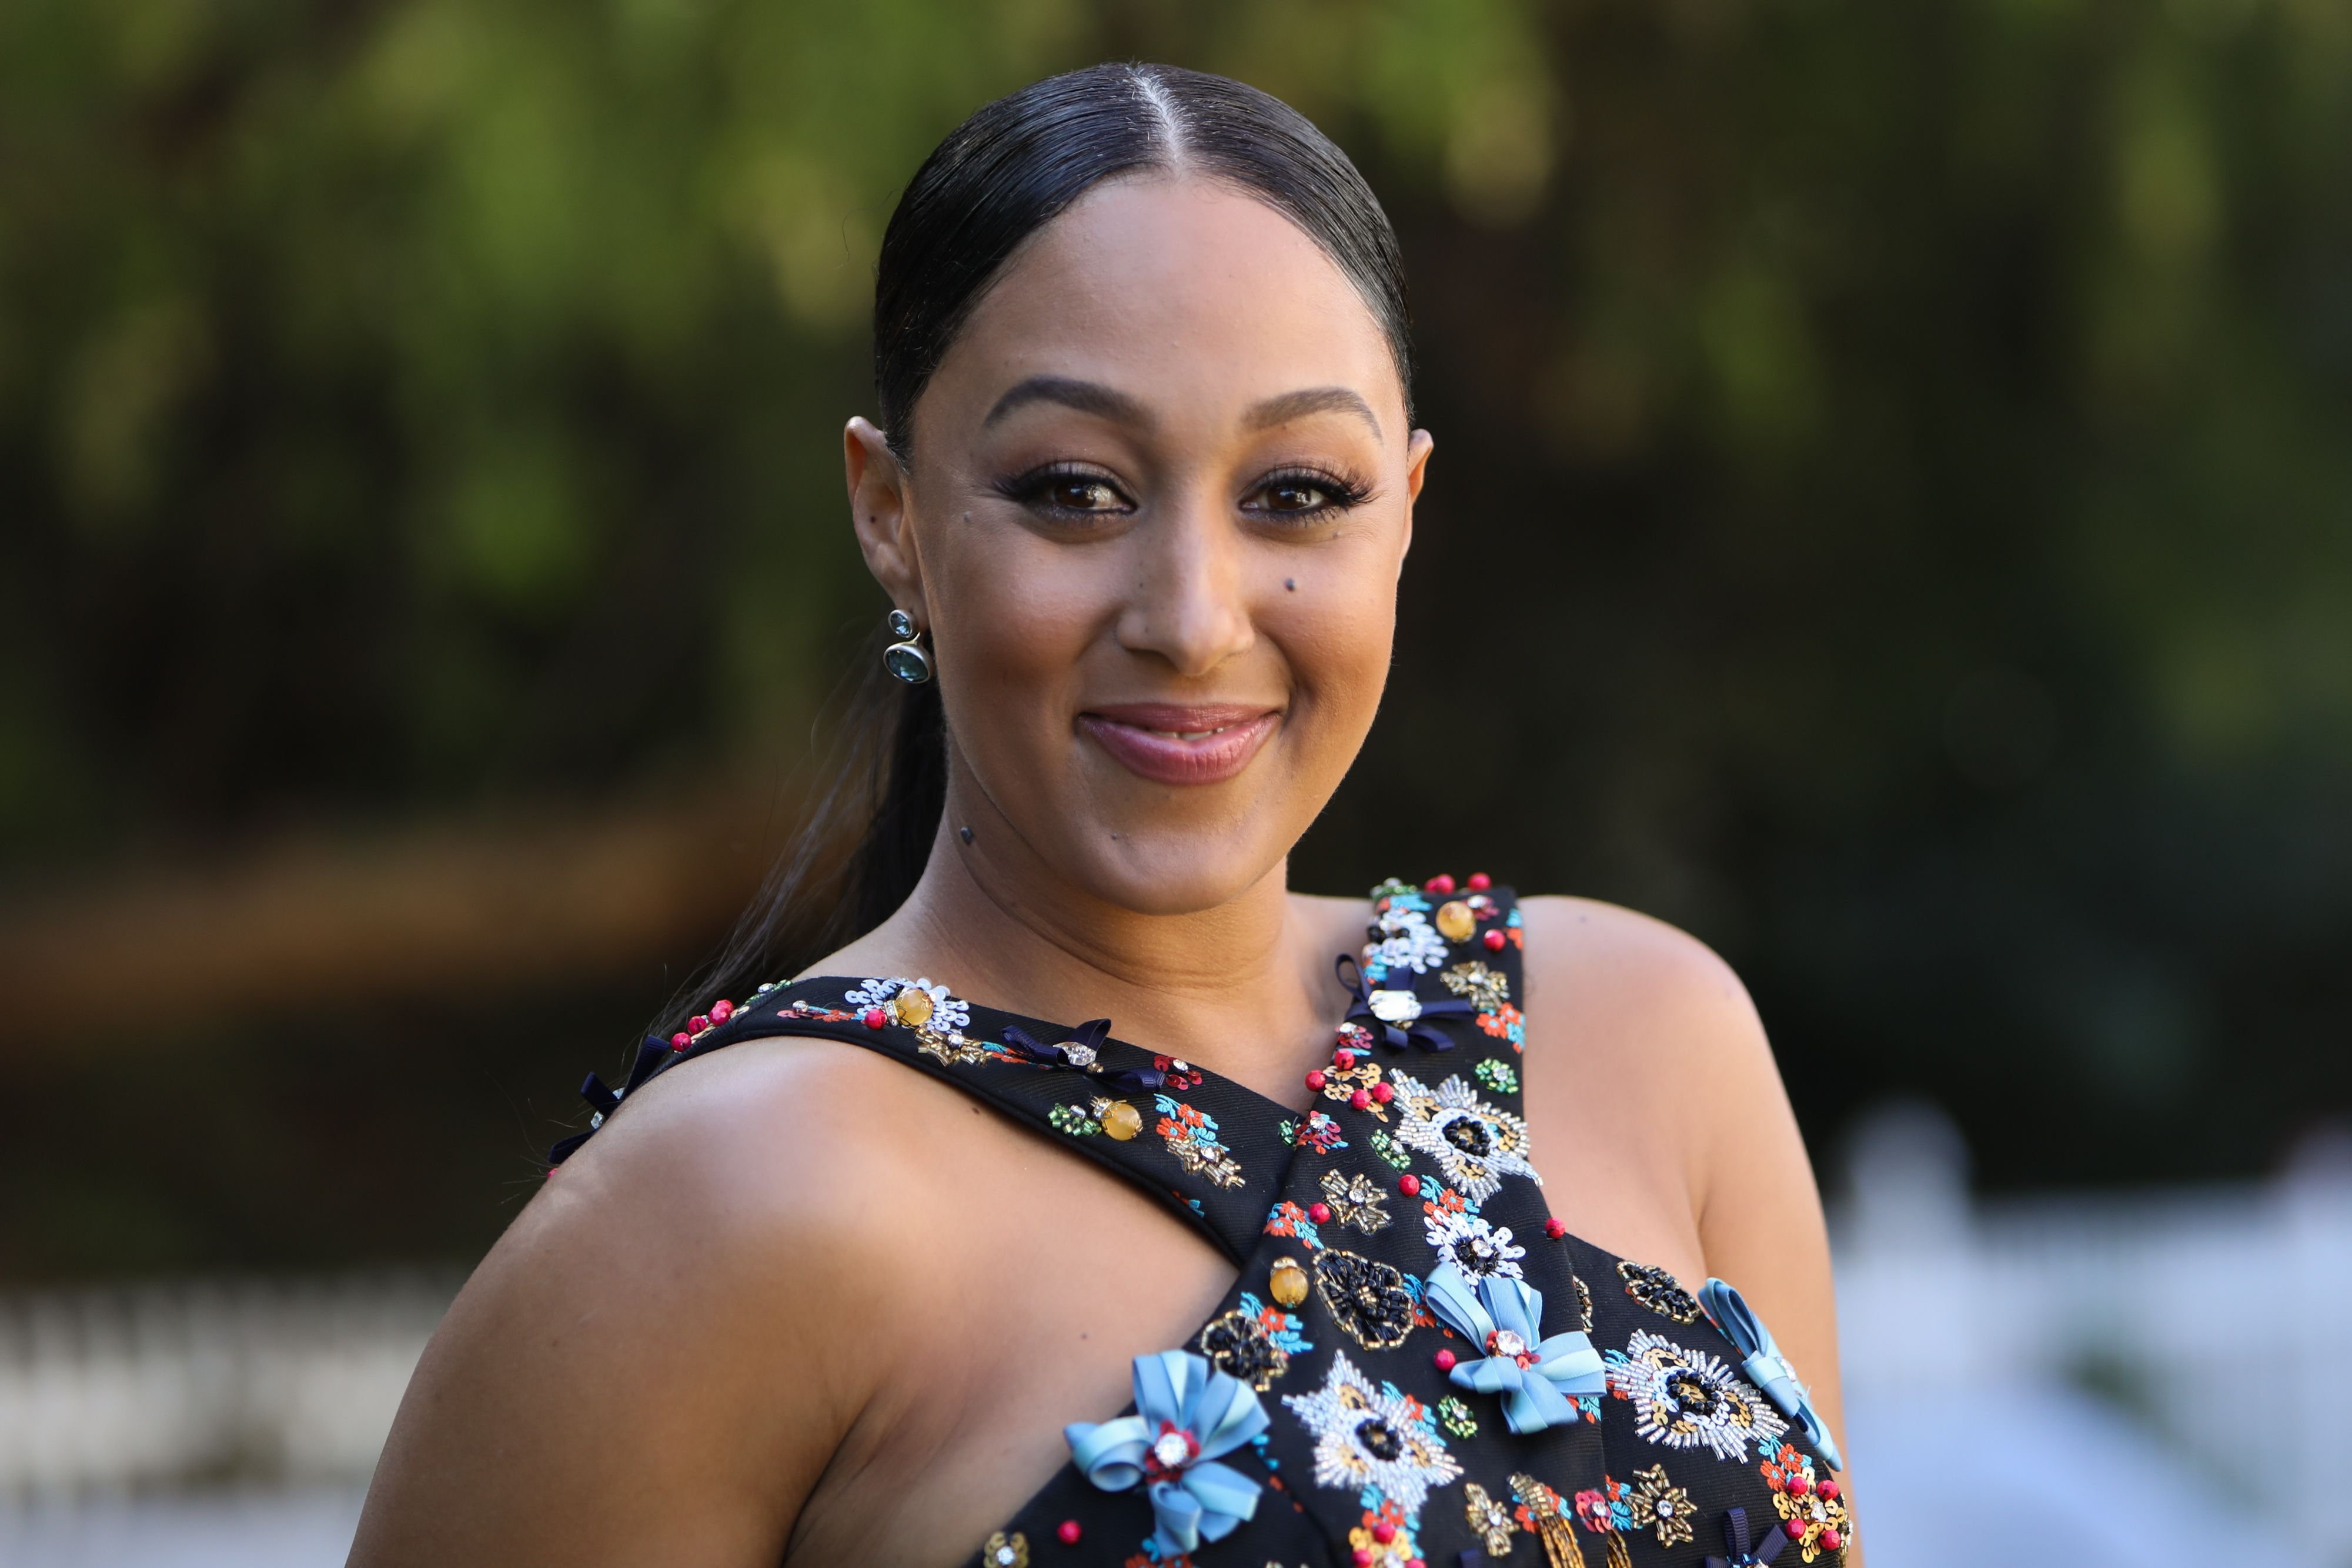 Tamera Mowry visiting Hallmark Channel's "Home & Family" in November 2019. | Photo: Getty Images